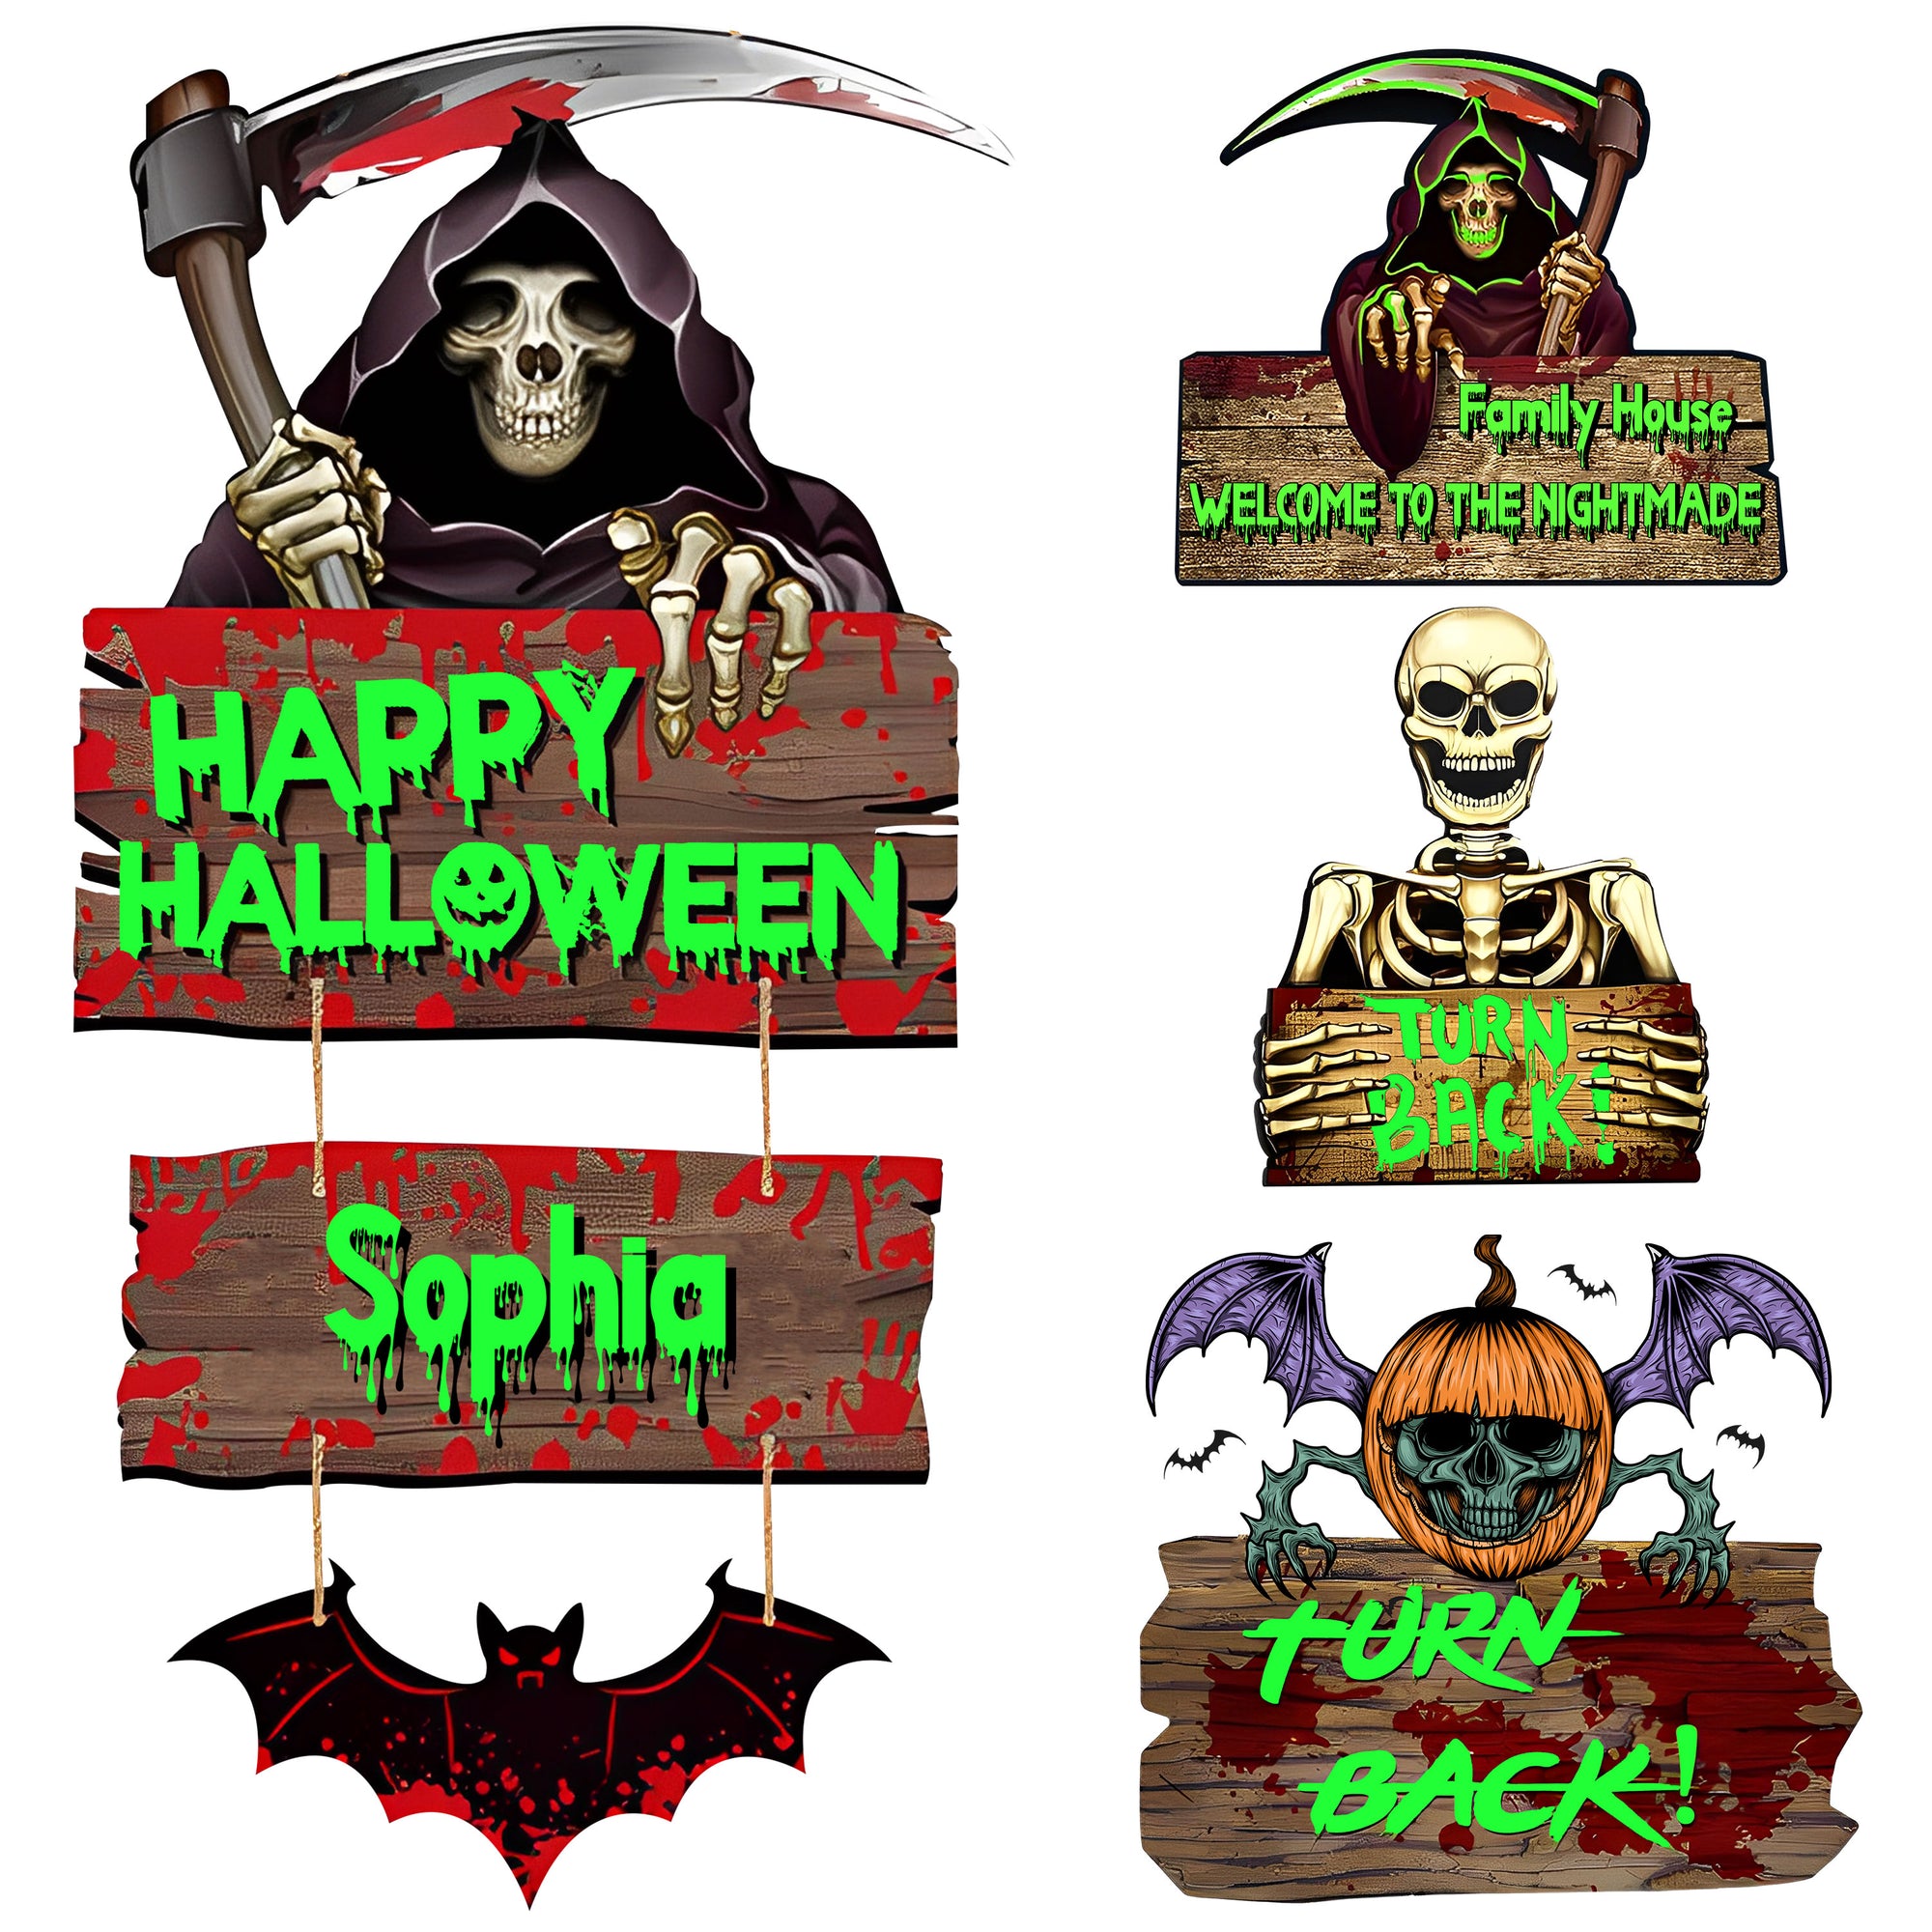 Glow-in-the-Dark 'Beware' Halloween Hanging Signs - 3-Piece Set for Outdoor Decor -Personalized Halloween Light Yard & Lawn Sign